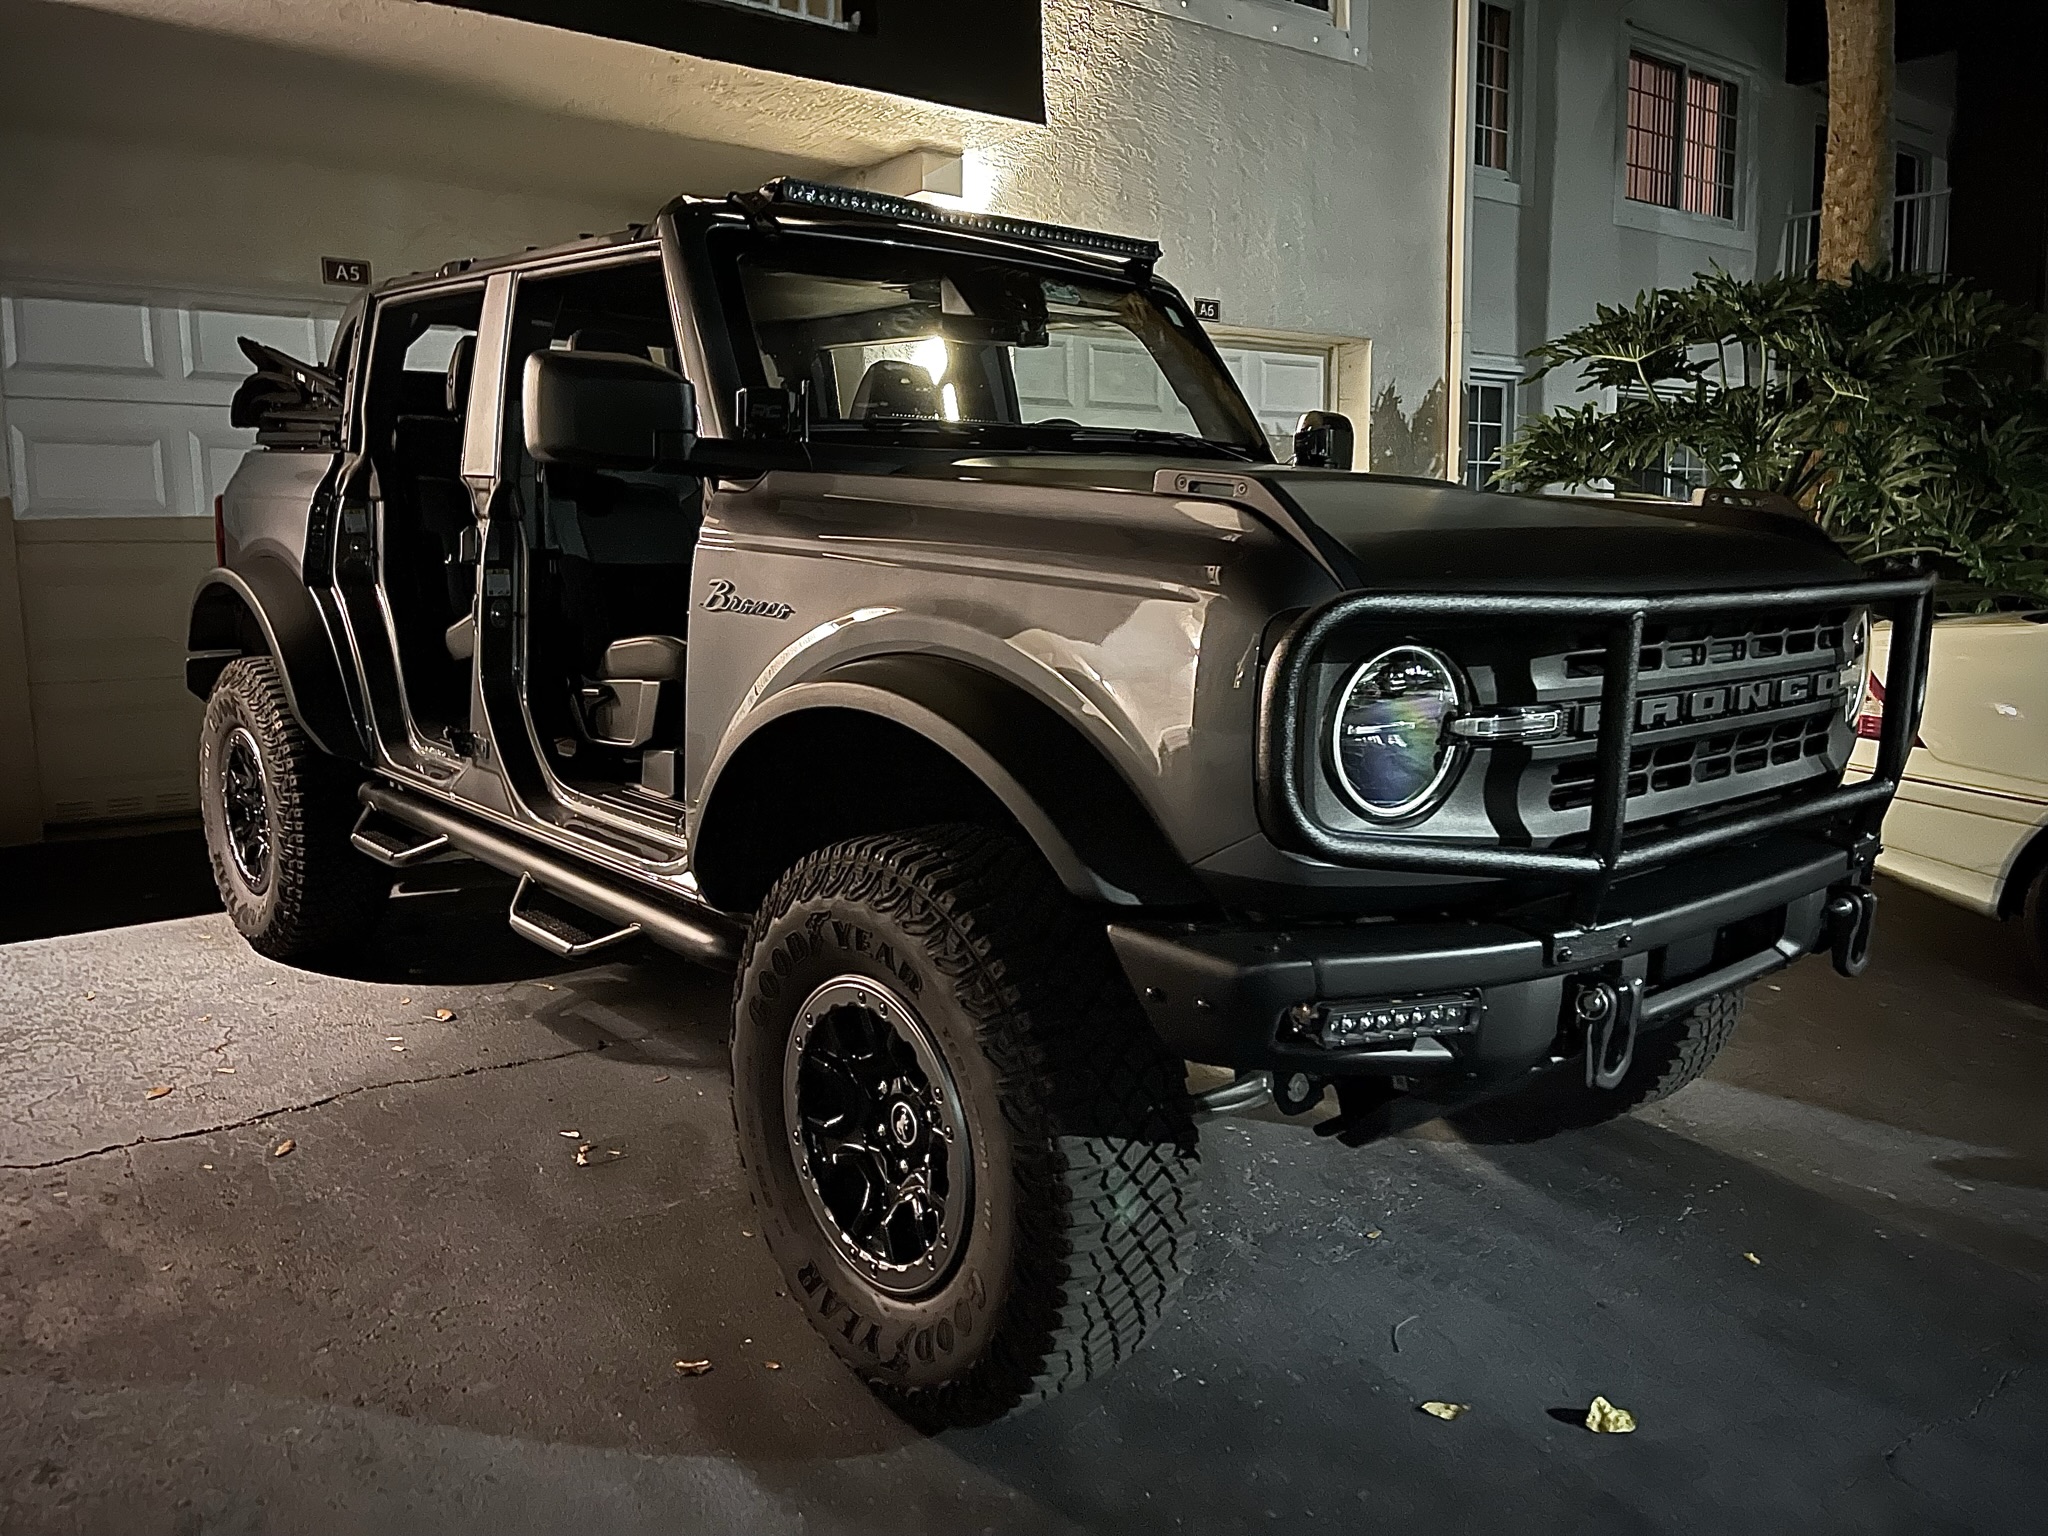 Ford Bronco Let’s see your doors off pics… B213652D-0441-4836-9EE7-B95EC9059169